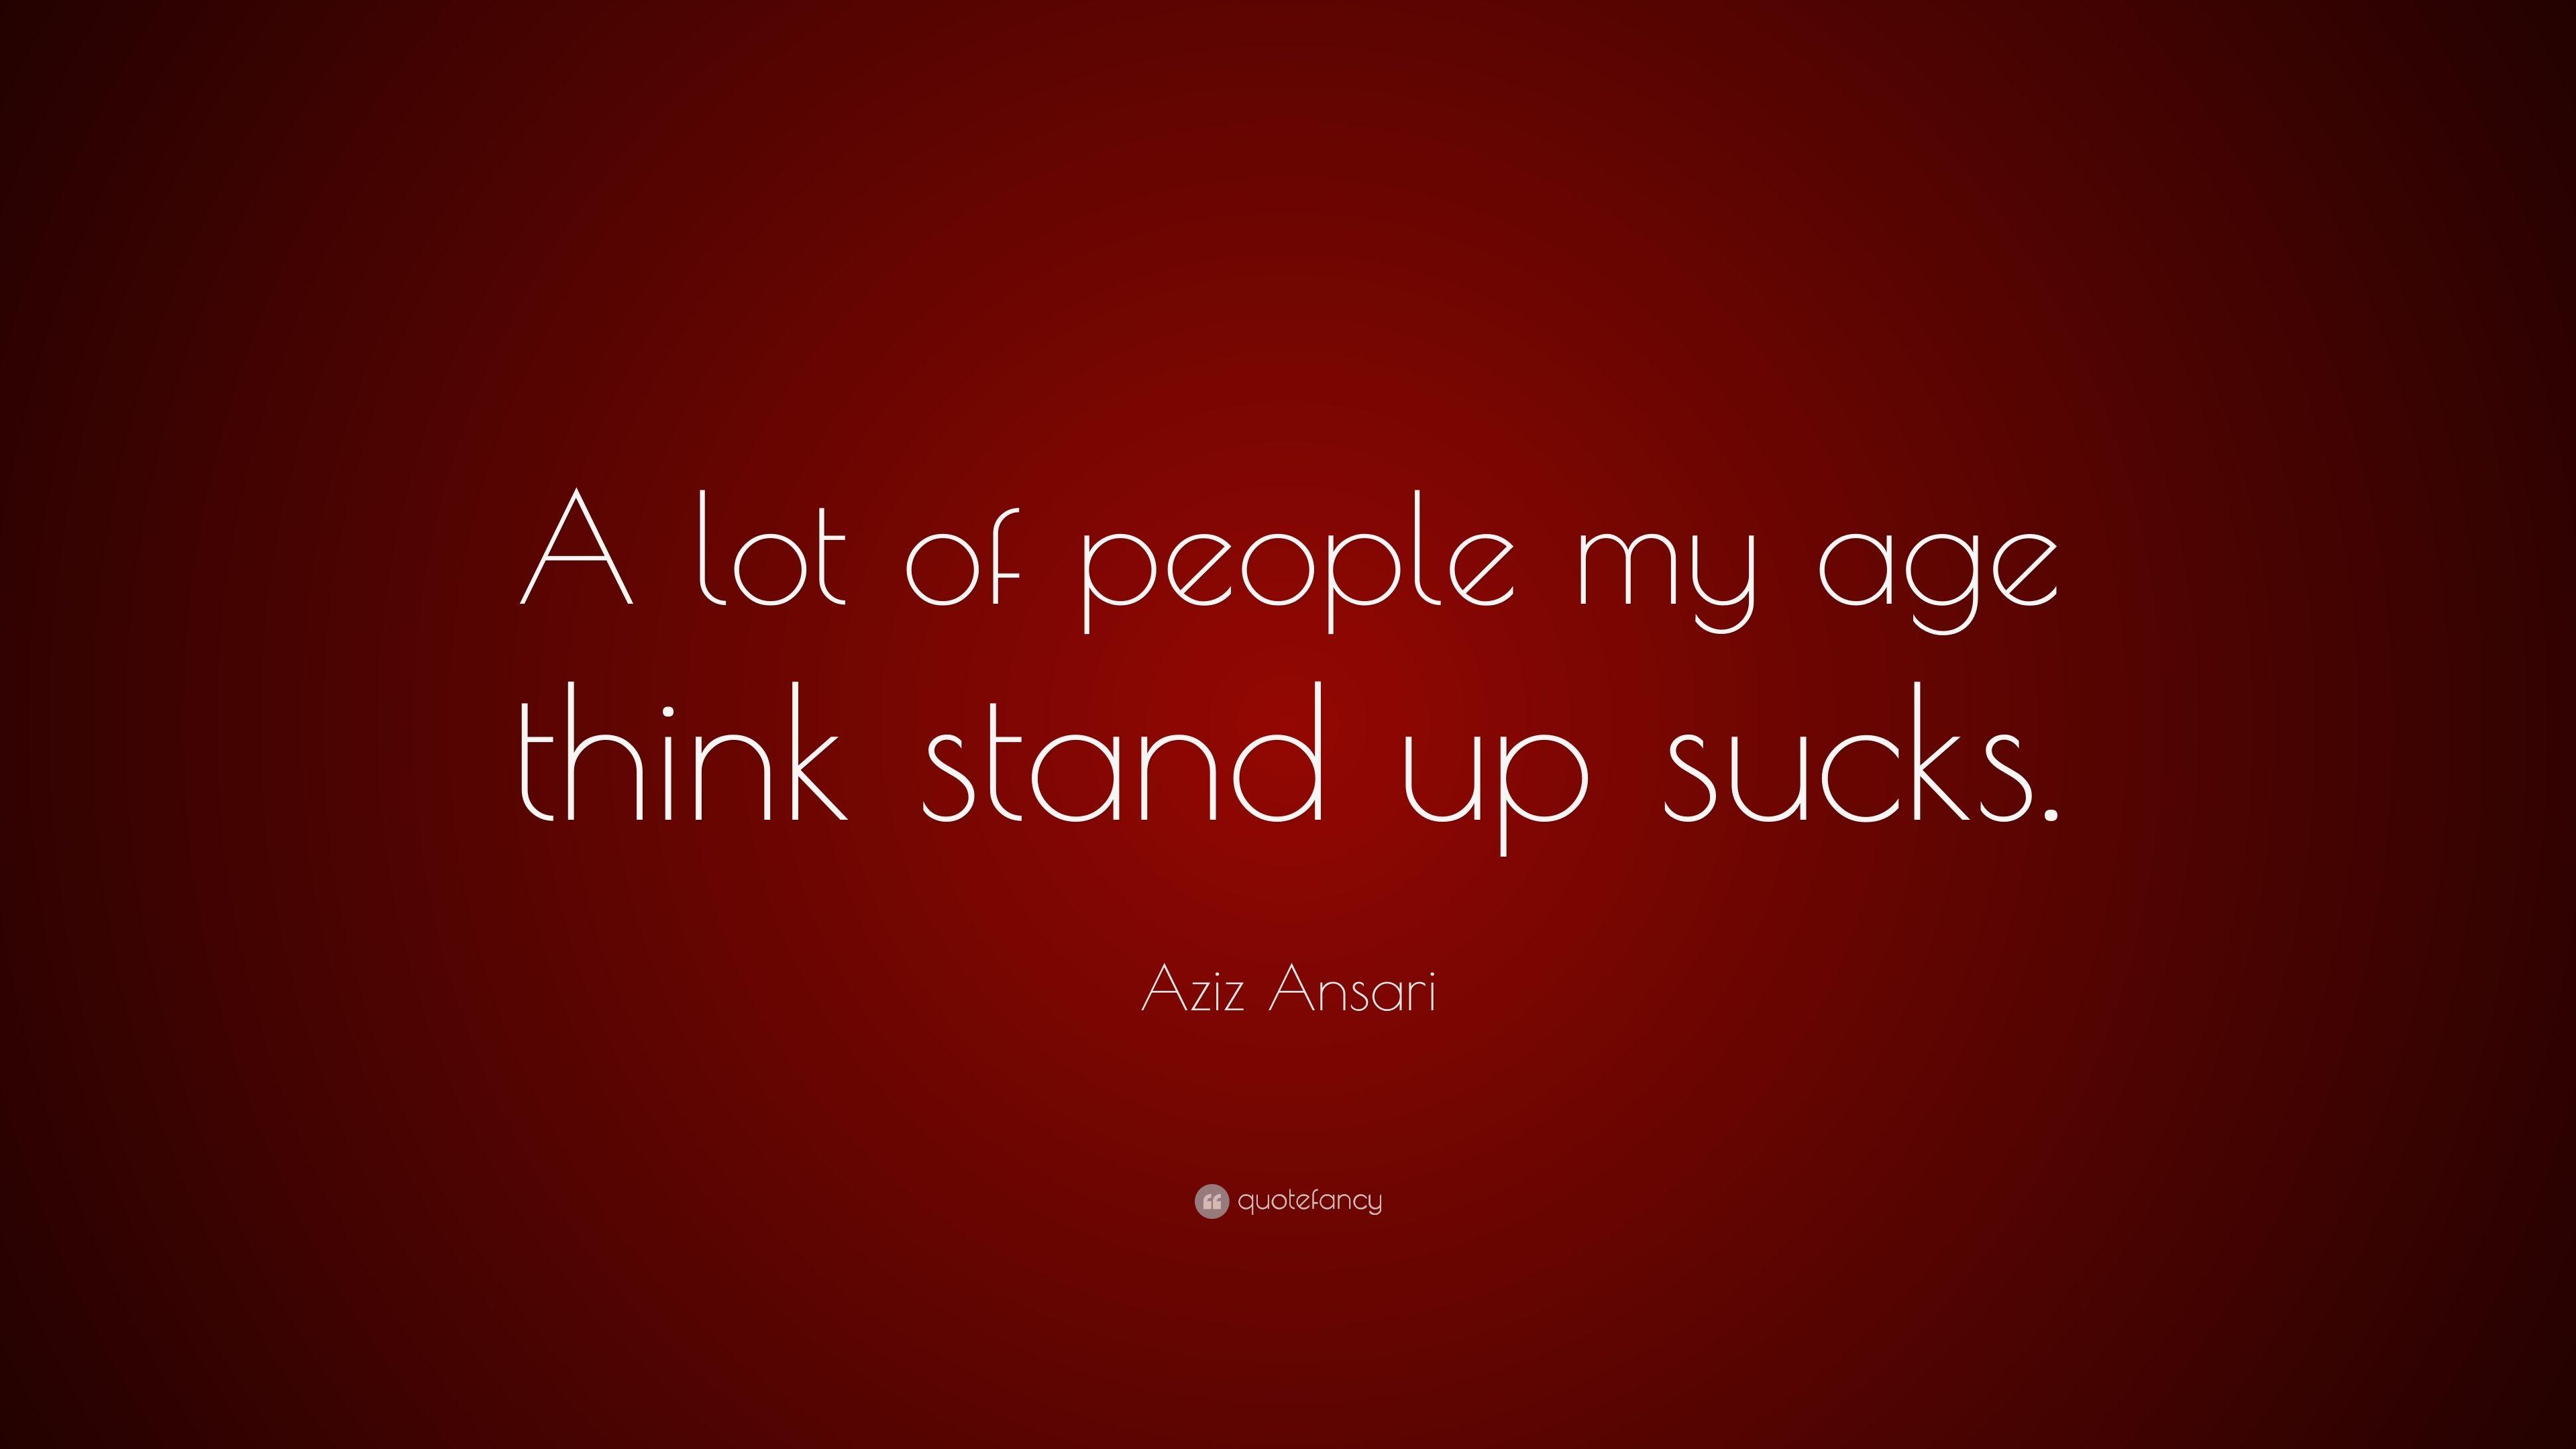 Aziz Ansari Quote: “A lot of people my age think stand up sucks.” 7